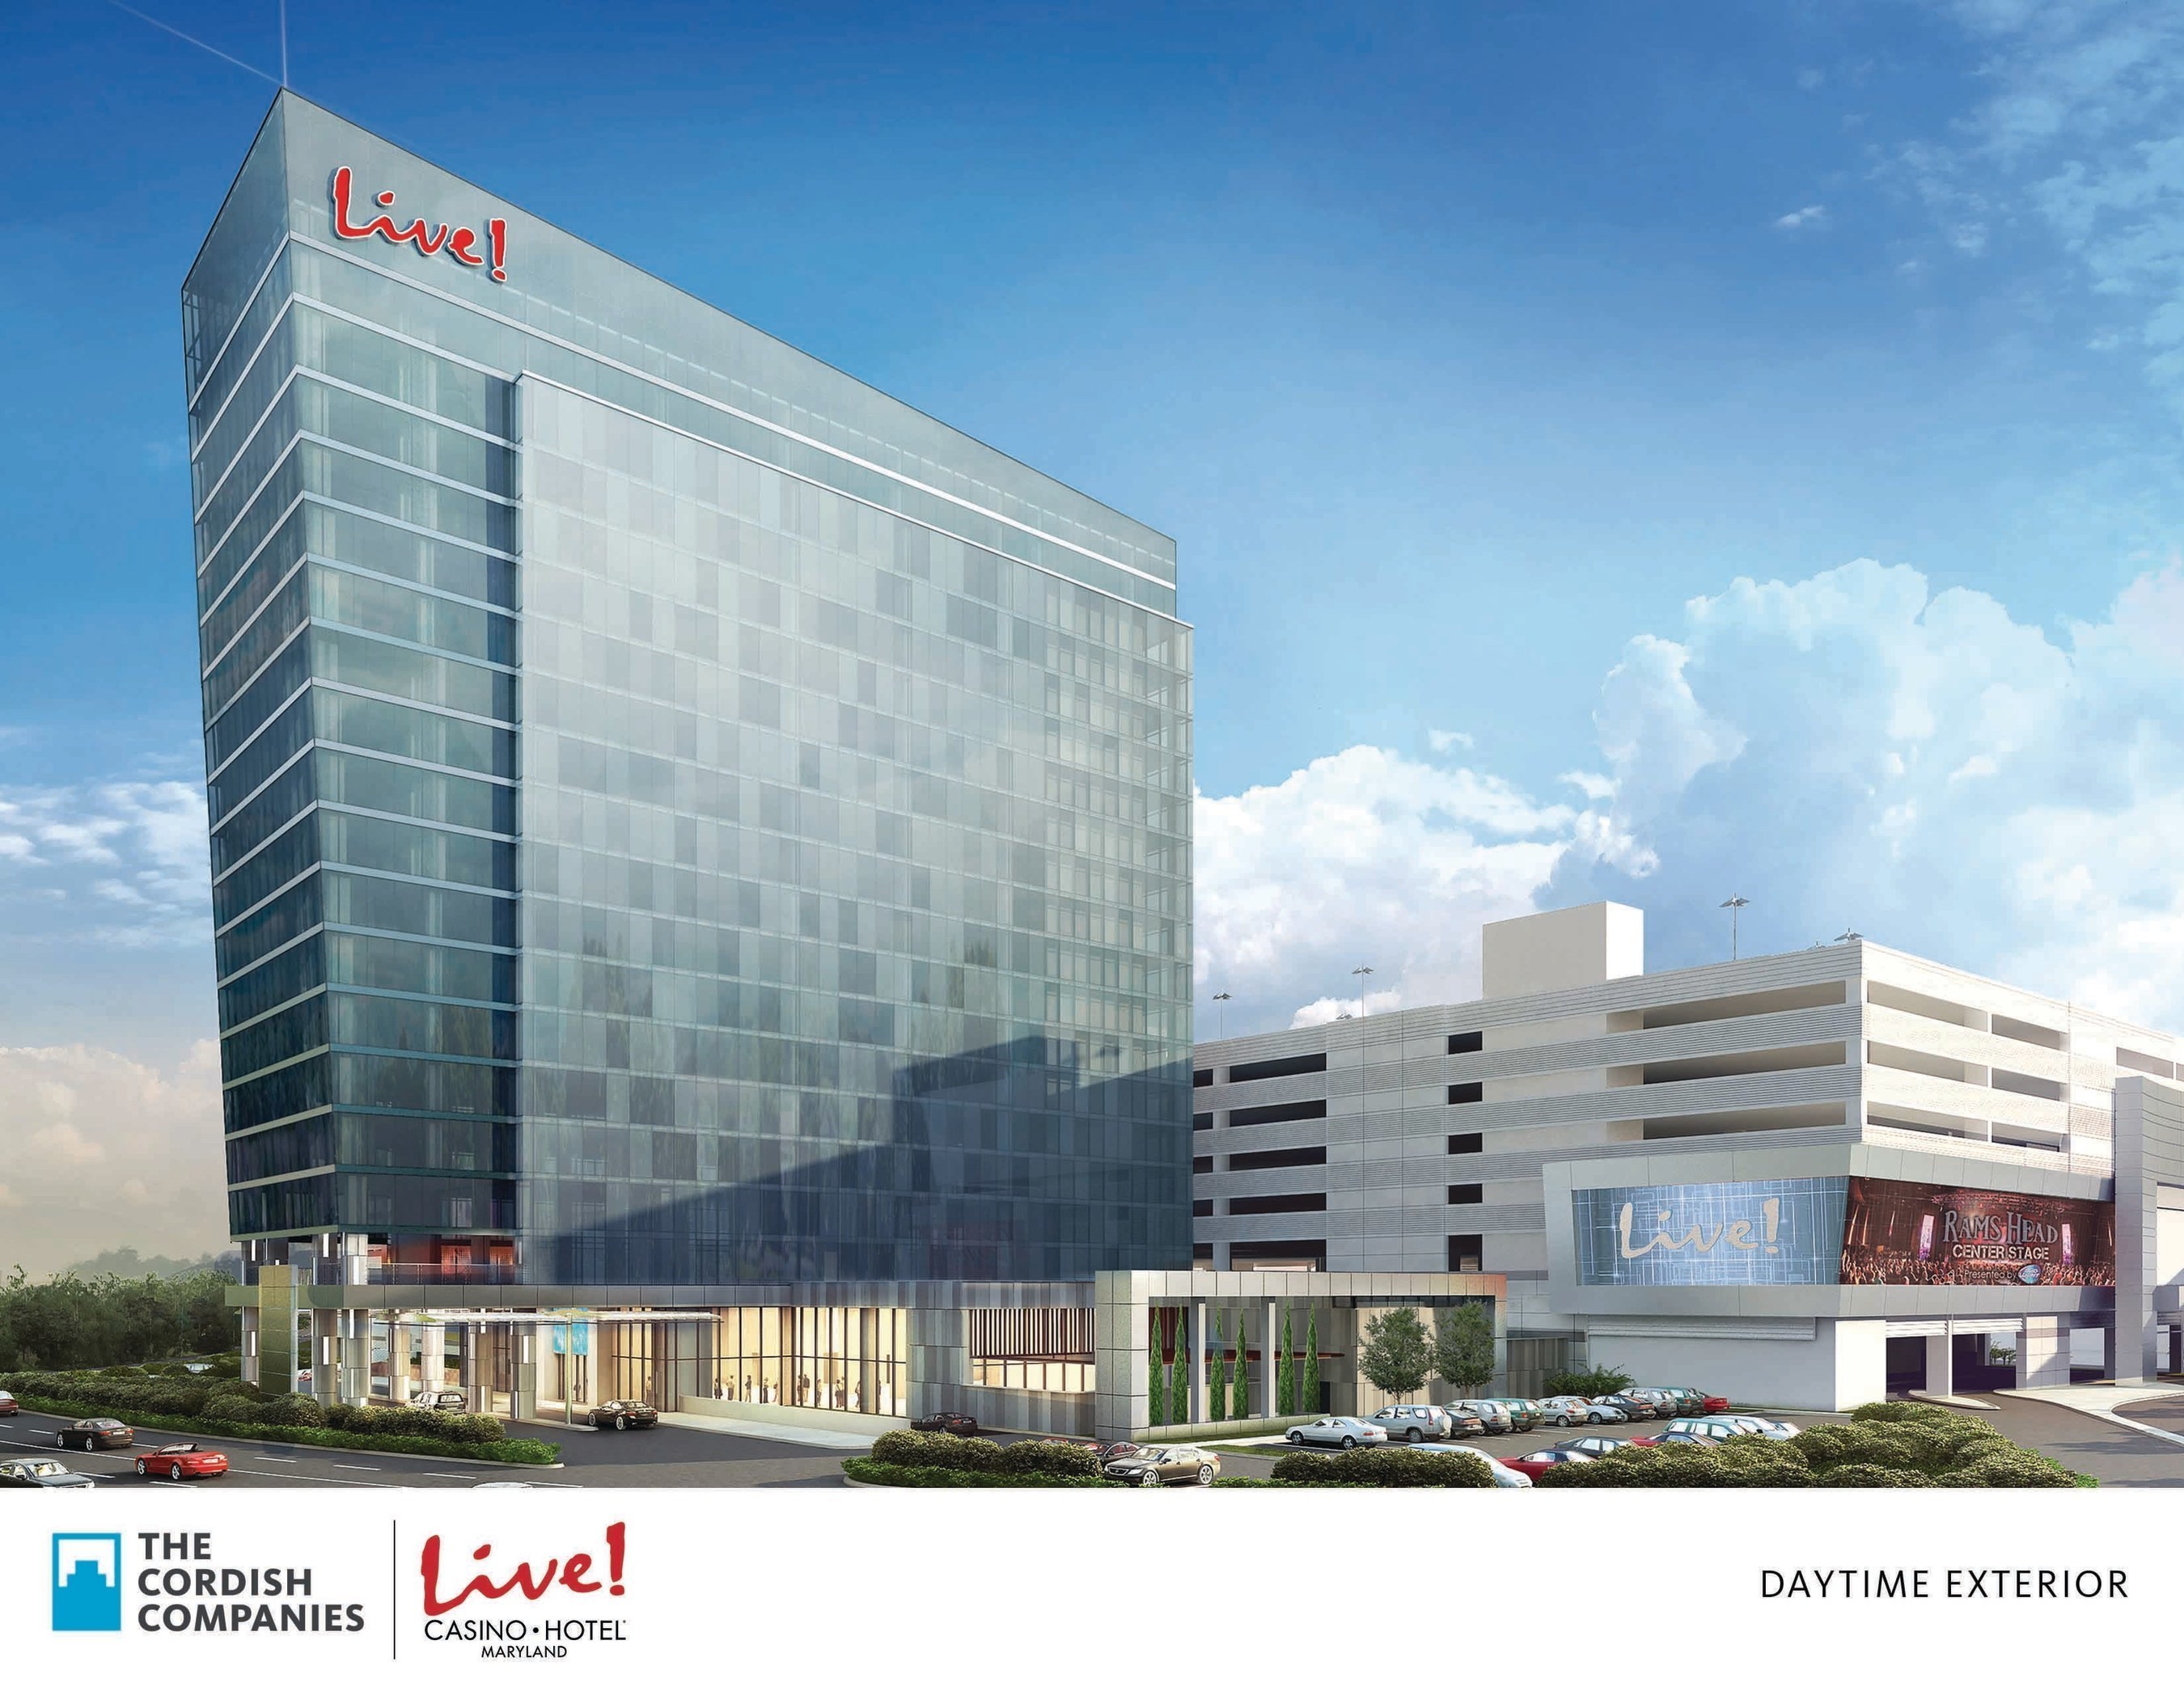 The Cordish Companies today broke ground on the new $200 million flagship Live! Hotel at Maryland Live! Casino, in Hanover, MD. The 350,000- square- foot property features a 17-story hotel tower, making it the tallest building in Anne Arundel County, with 310 guest rooms, an event center, meeting spaces, new dining options, and a day spa/salon. It is the first hotel in the country to carry the Live! brand. Projected completion in early 2018.